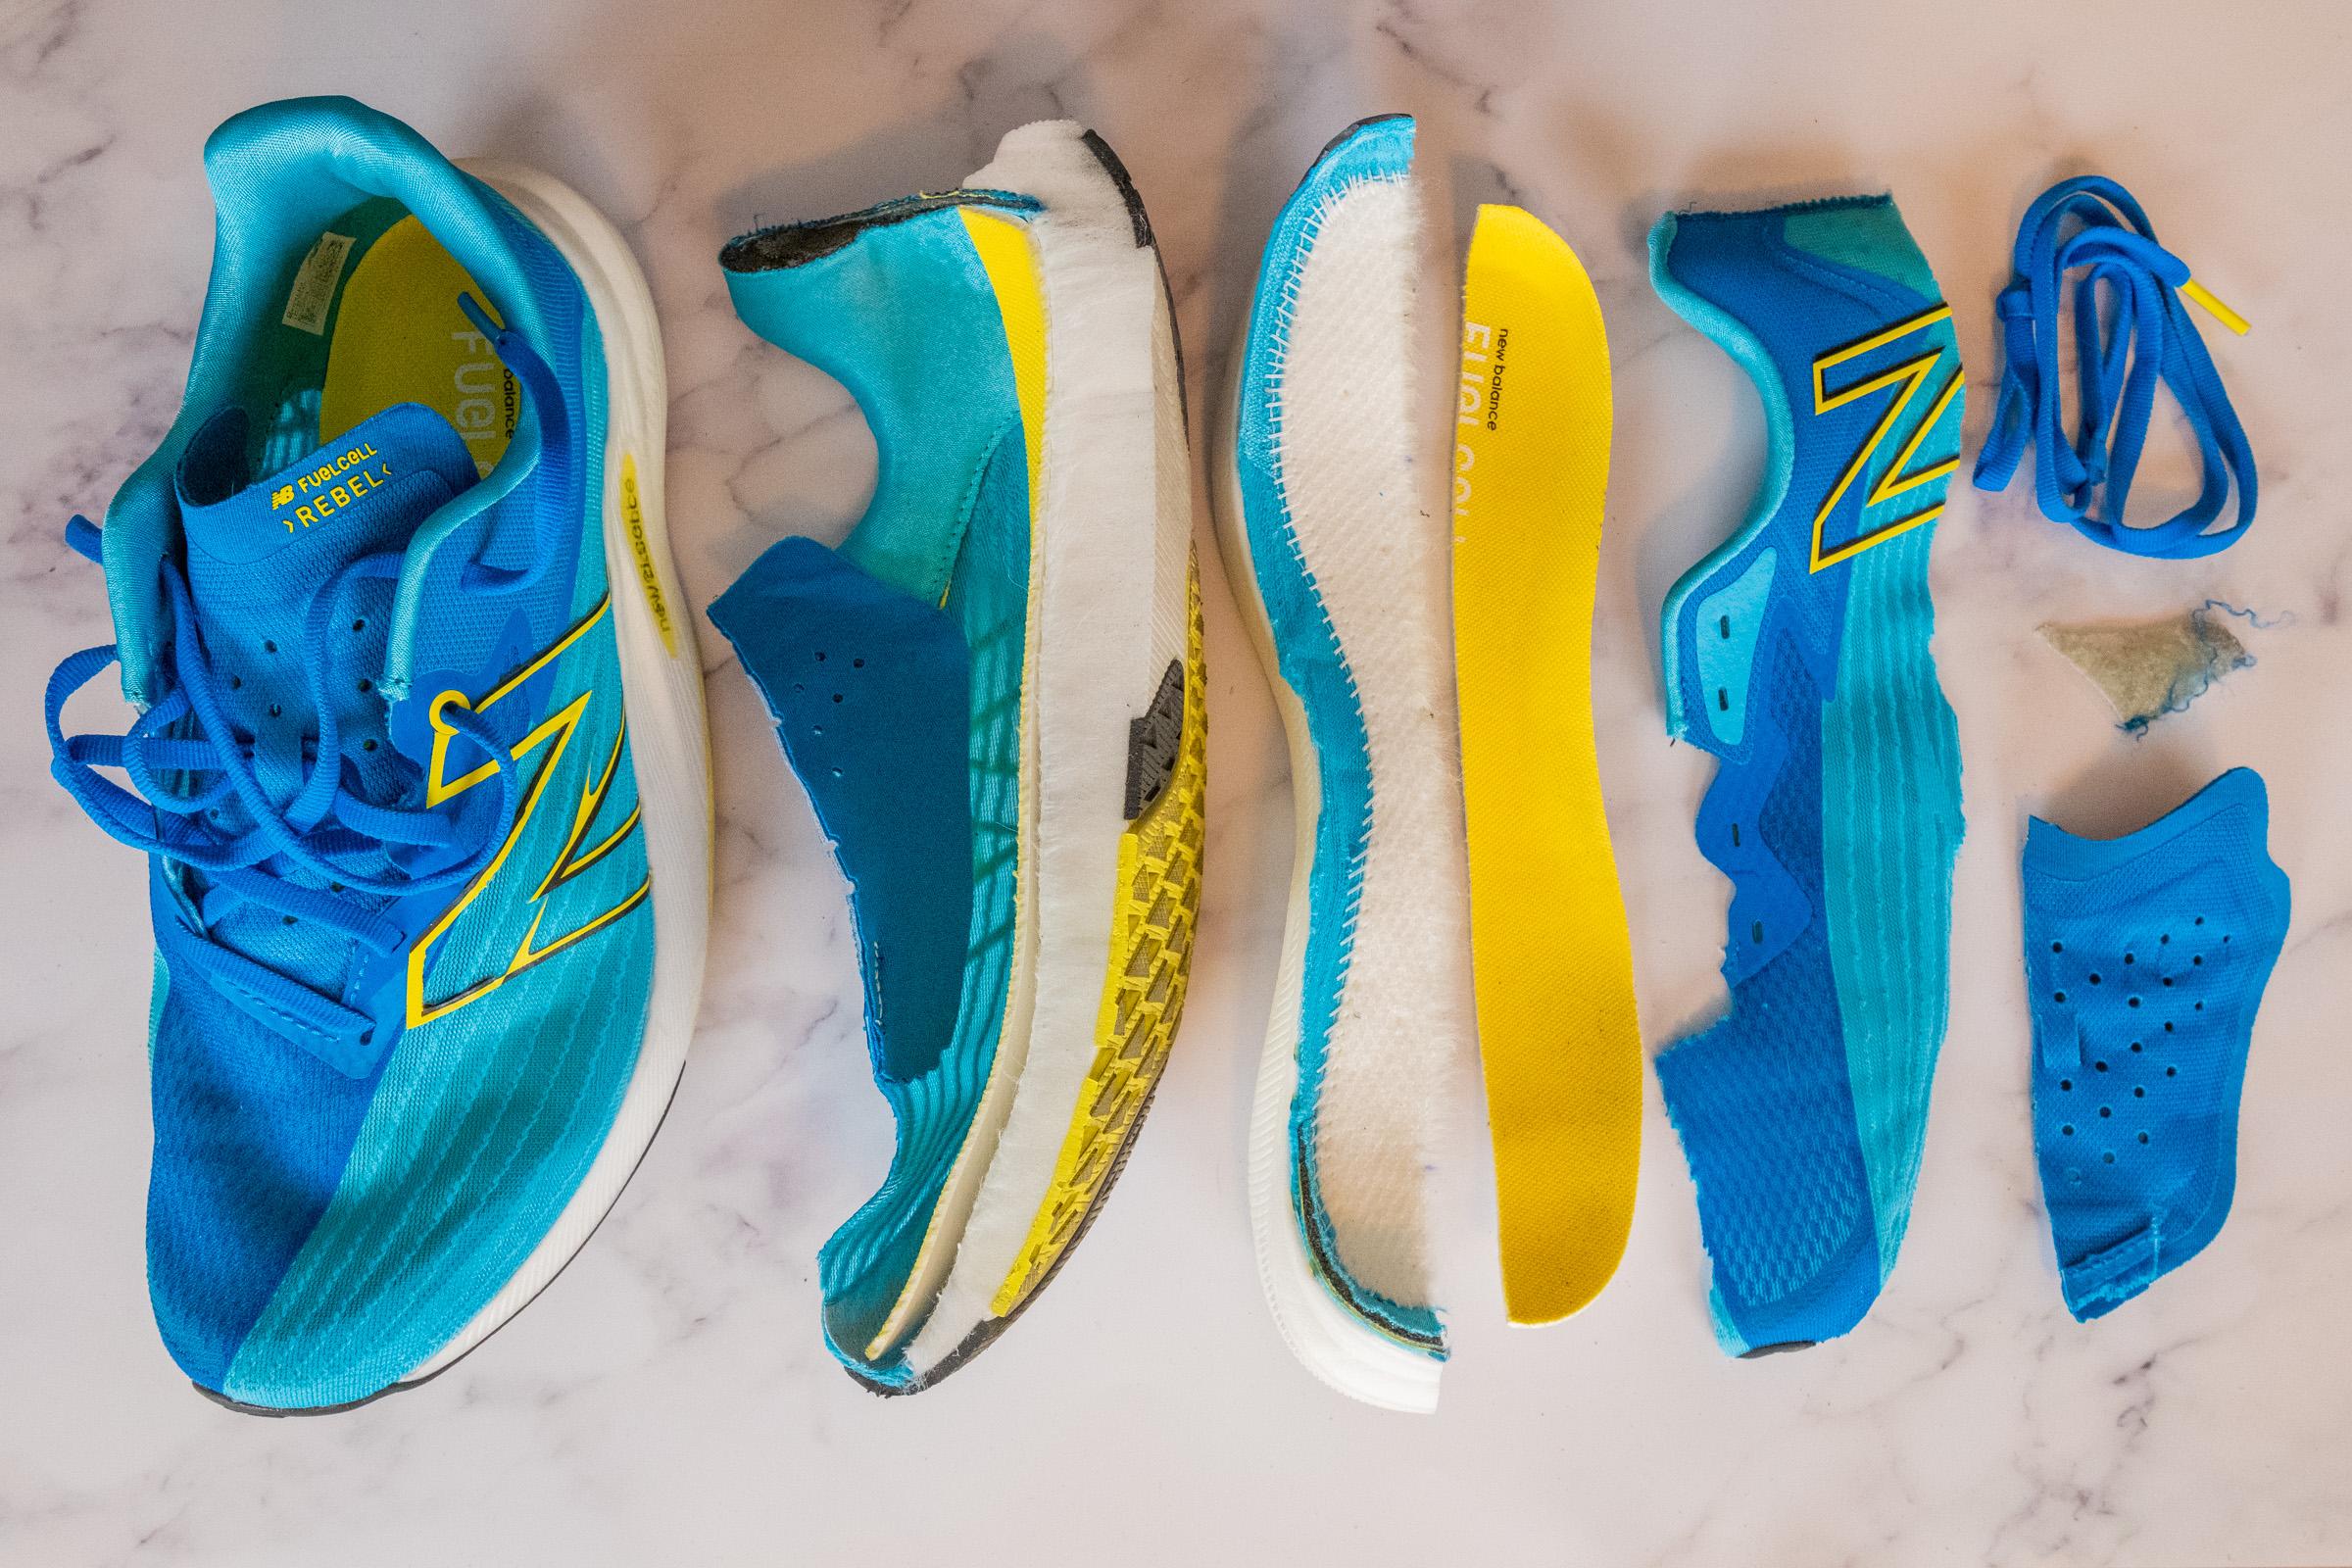 Cut in half: New Balance FuelCell Rebel v2 Review | RunRepeat